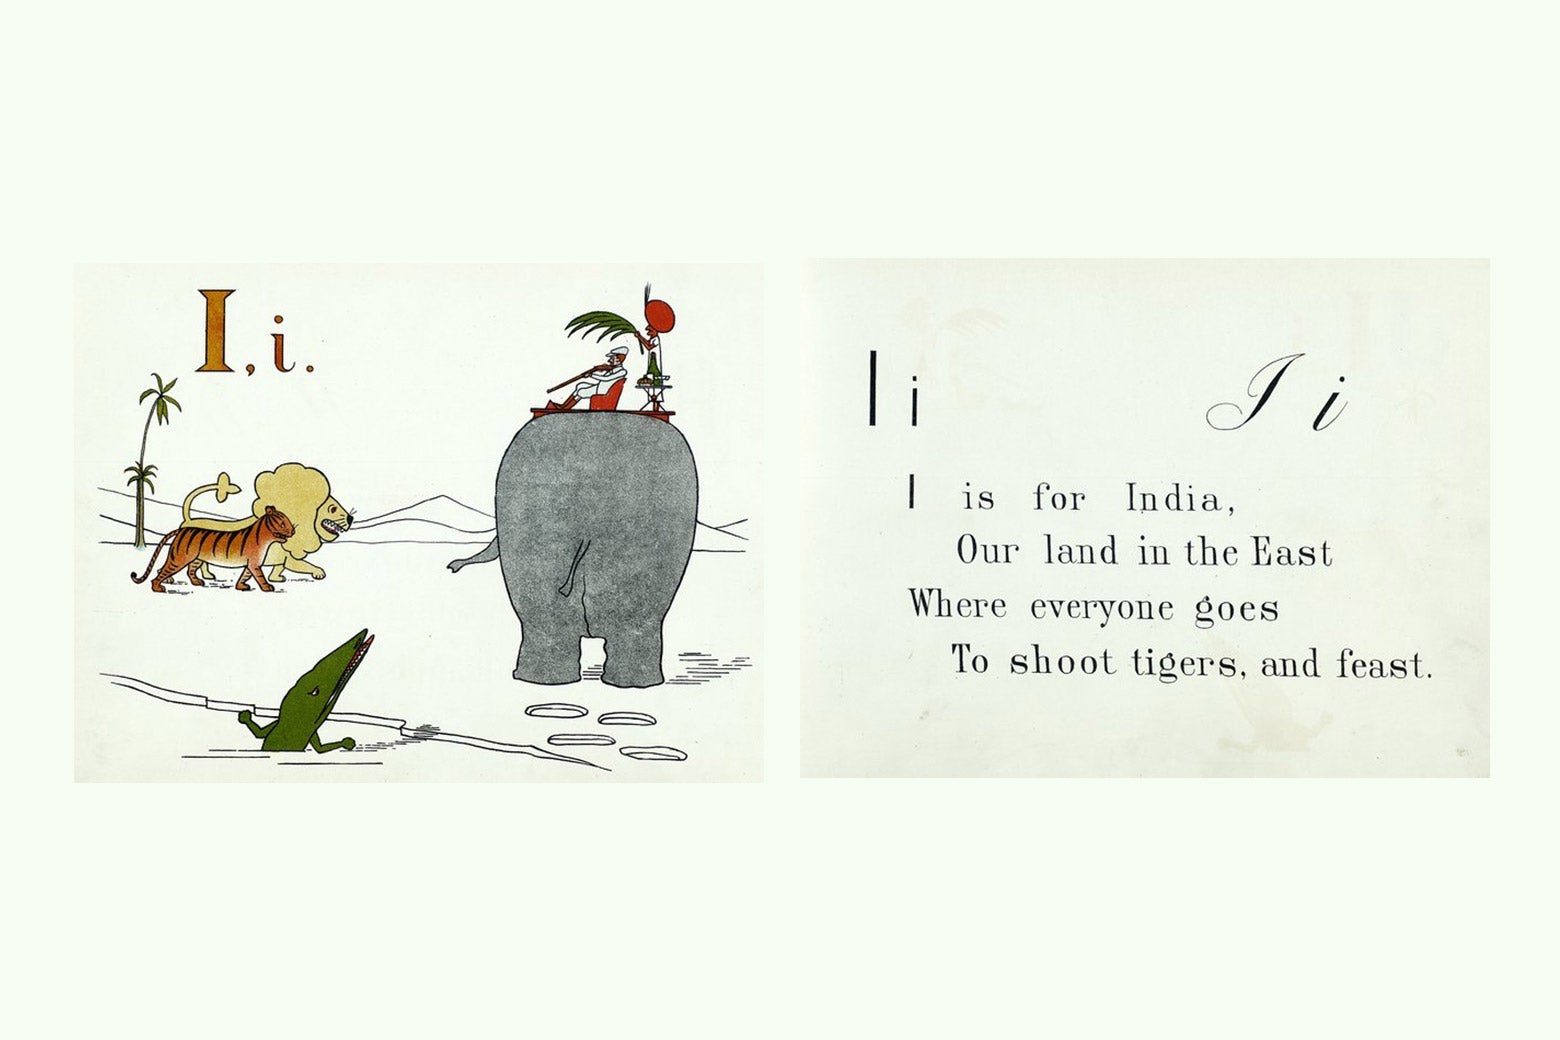 Two pages from a children's book featuring an illustration of a British governor lounging on top of an elephant near a lion, a tiger, and a crocodile alongside the rhyme "I is for India, / Our land in the East / Where everyone goes / To shoot tigers, and feast"